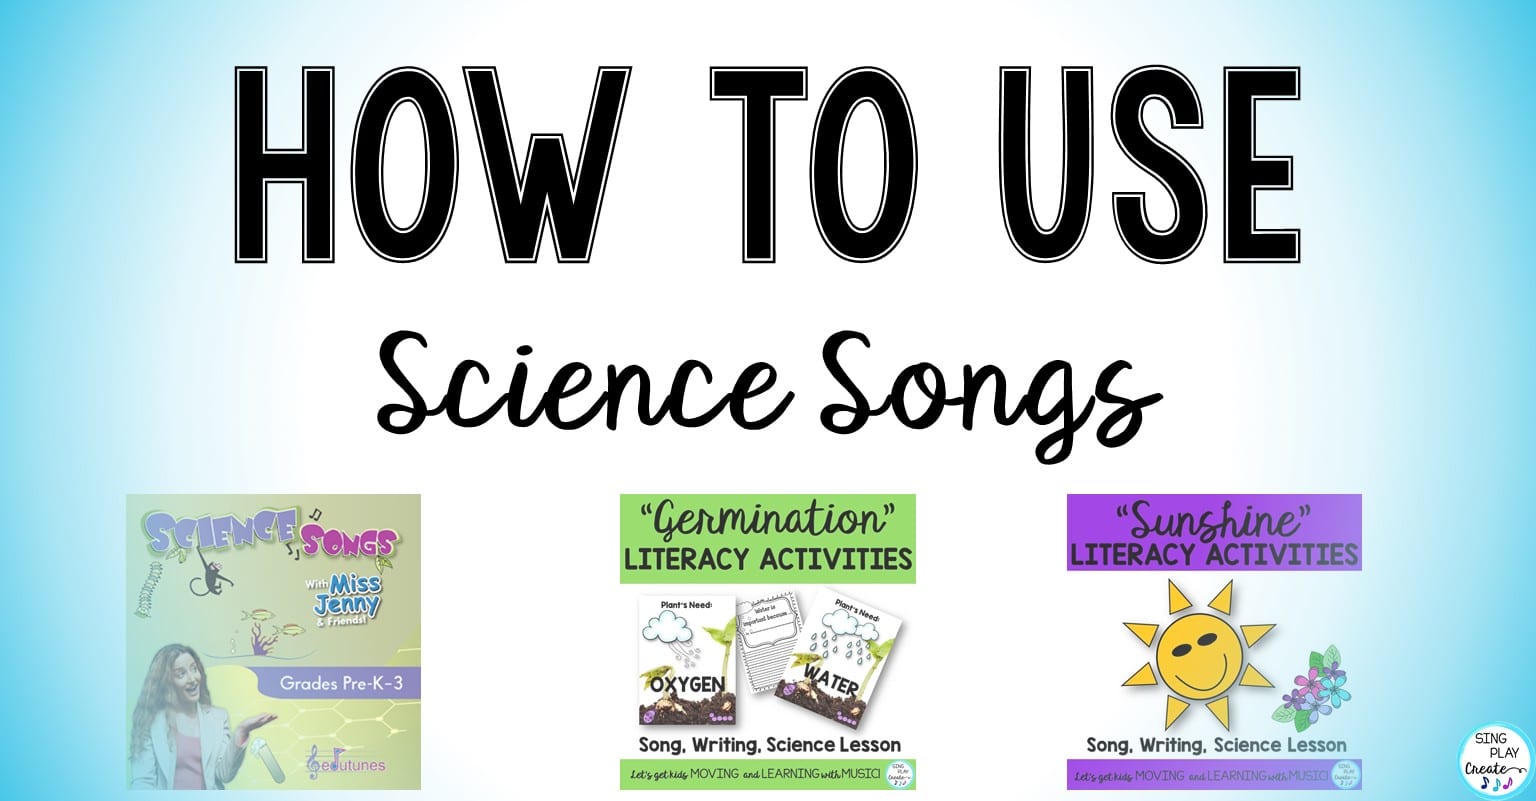 You are currently viewing How to Use Science Songs in the Classroom with Miss Jenny at Edutunes